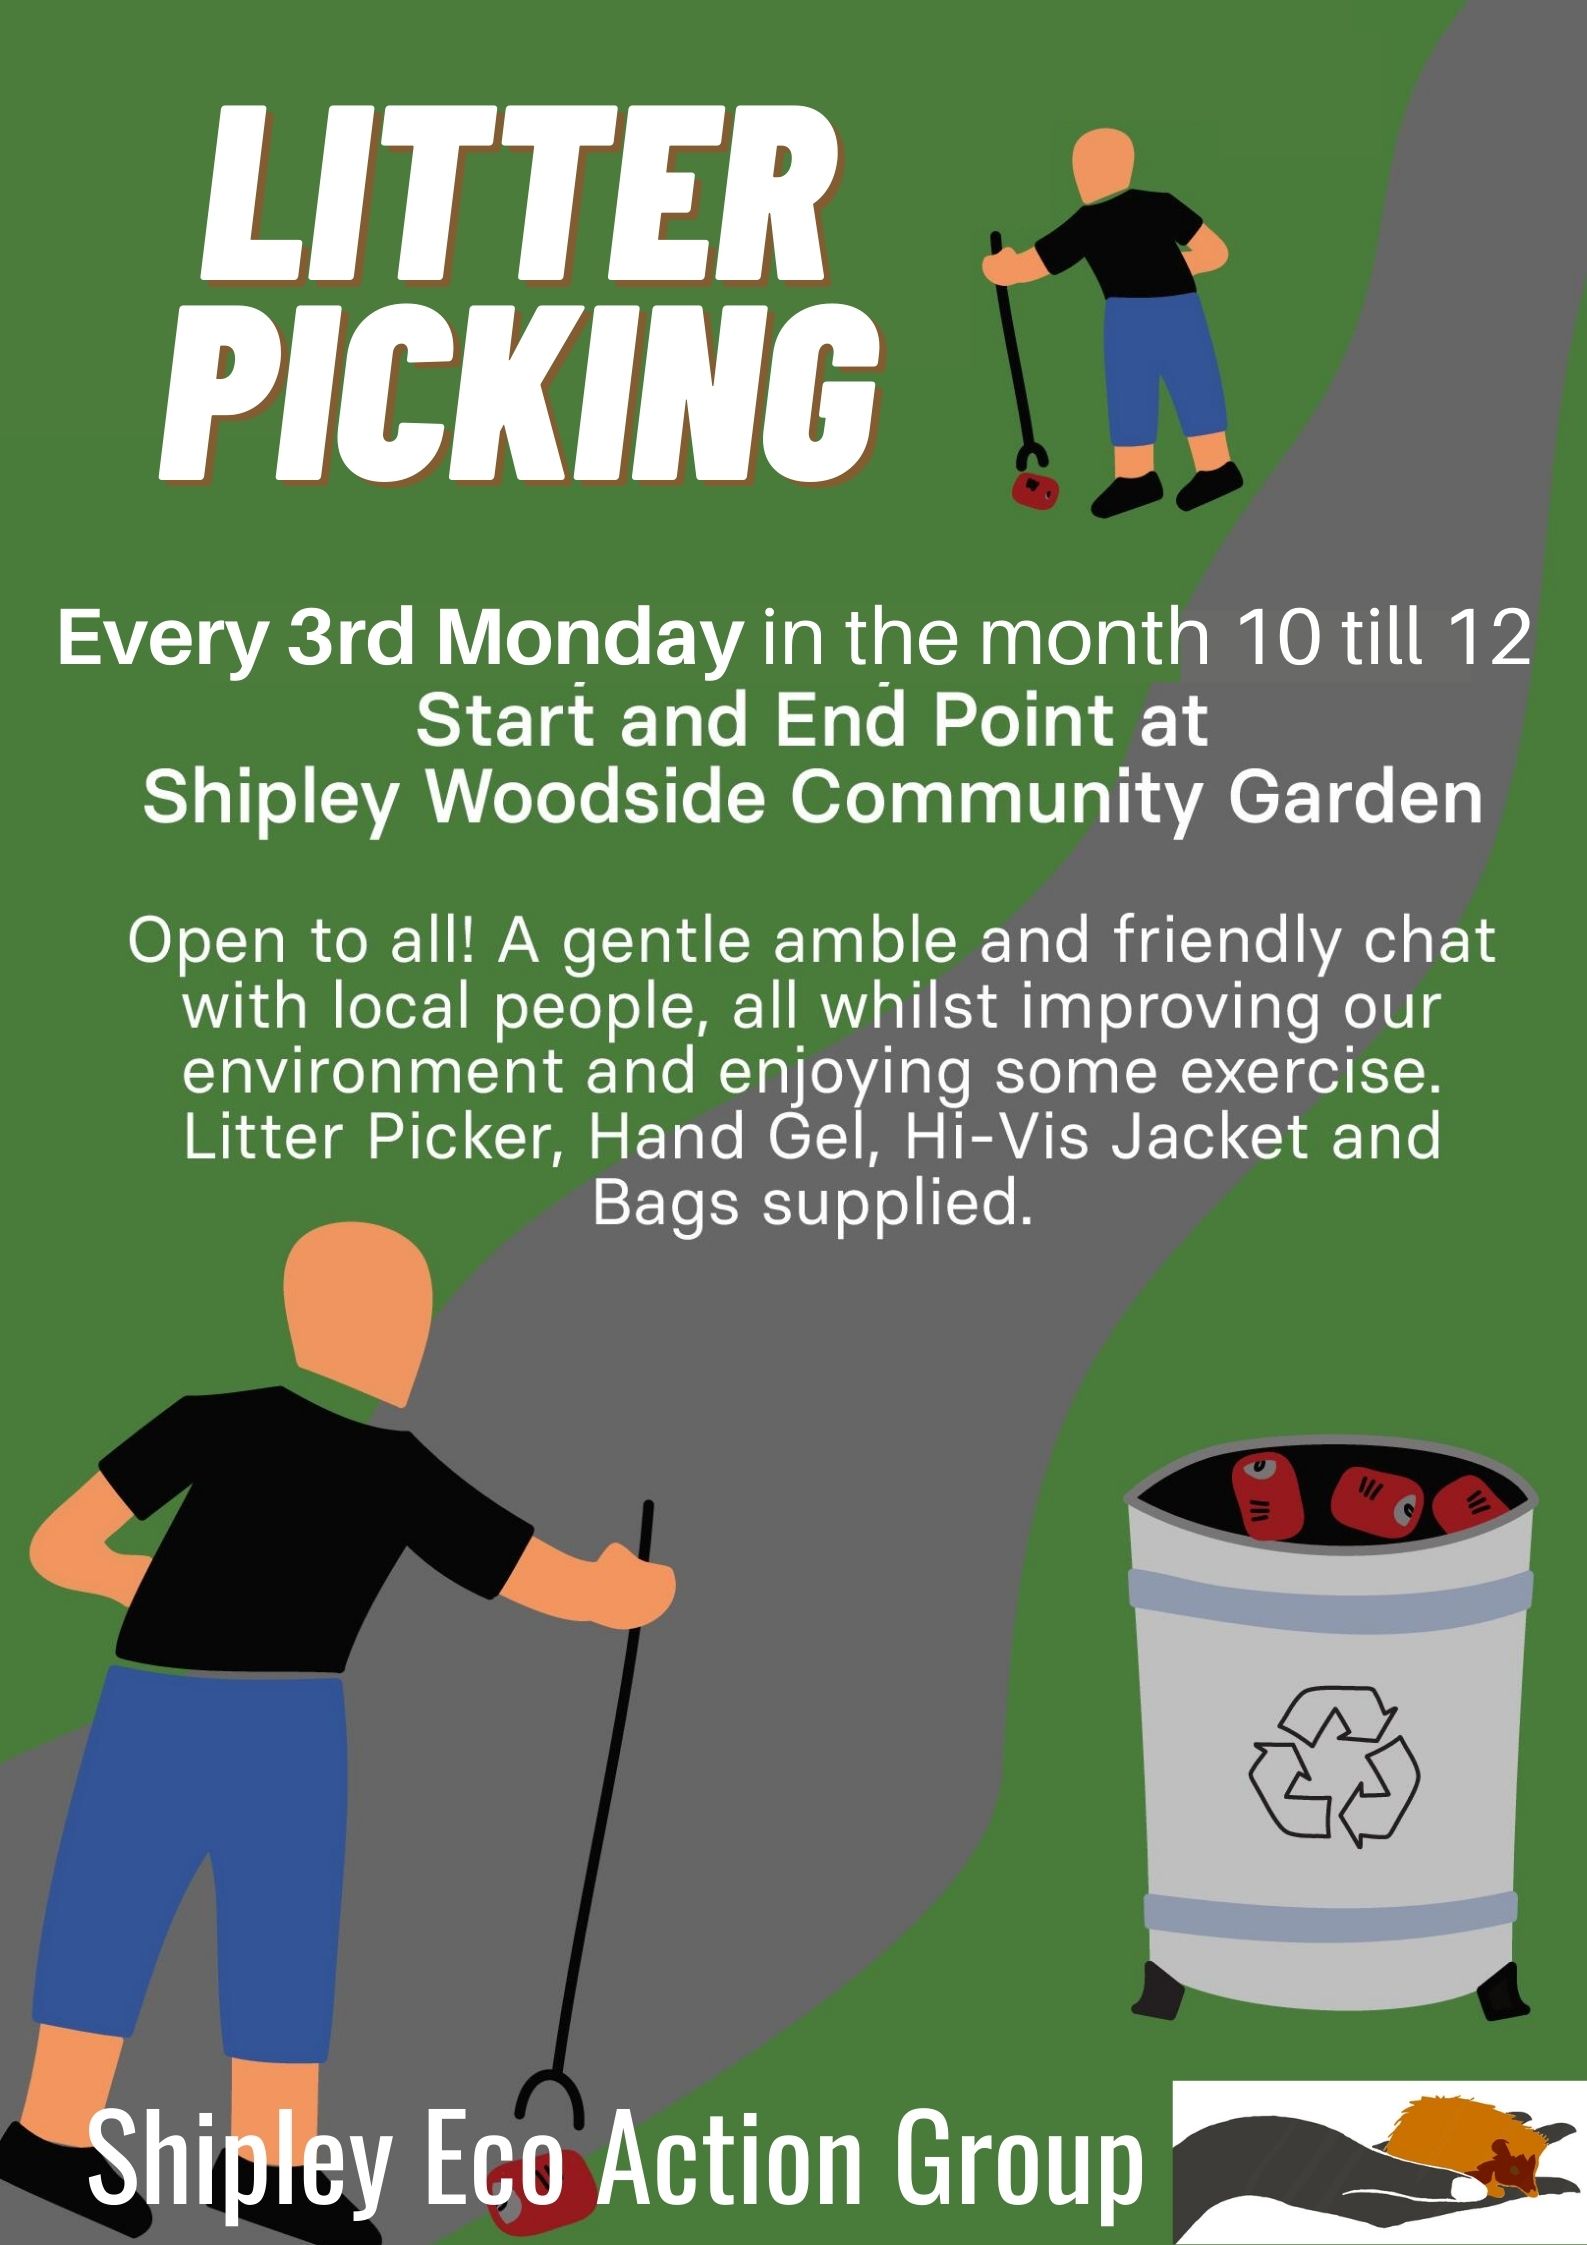 Litter Picking in Shipley area - SEAG - Shipley Eco-Action Group